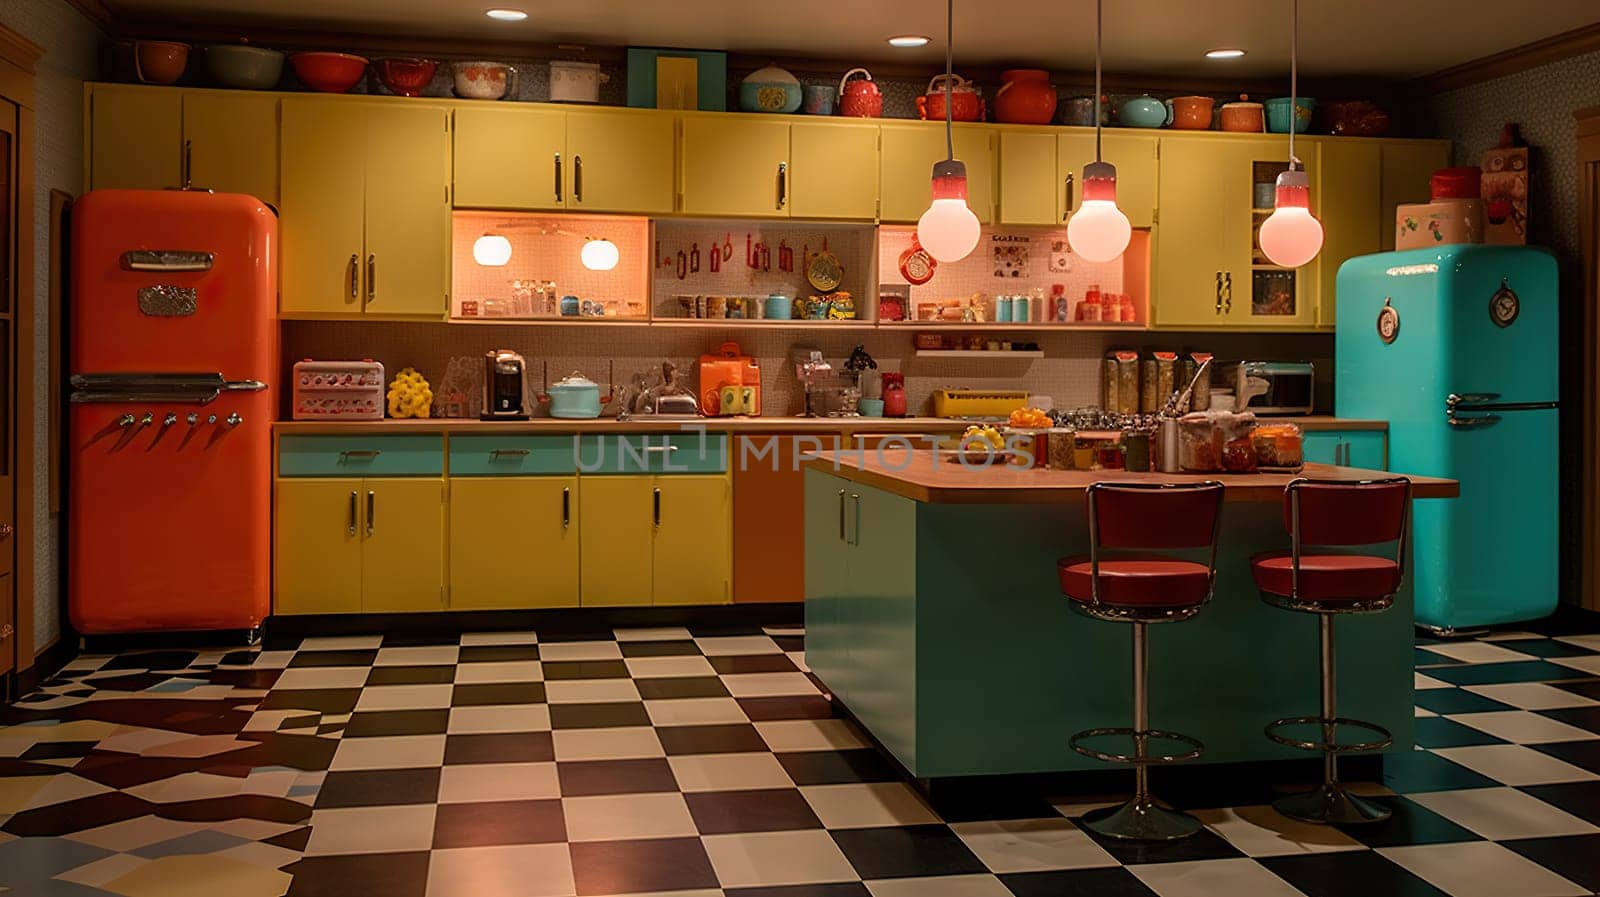 A stylish retro kitchen featuring vibrant vintage appliances, chic furniture, and classic checkered flooring by chrisroll